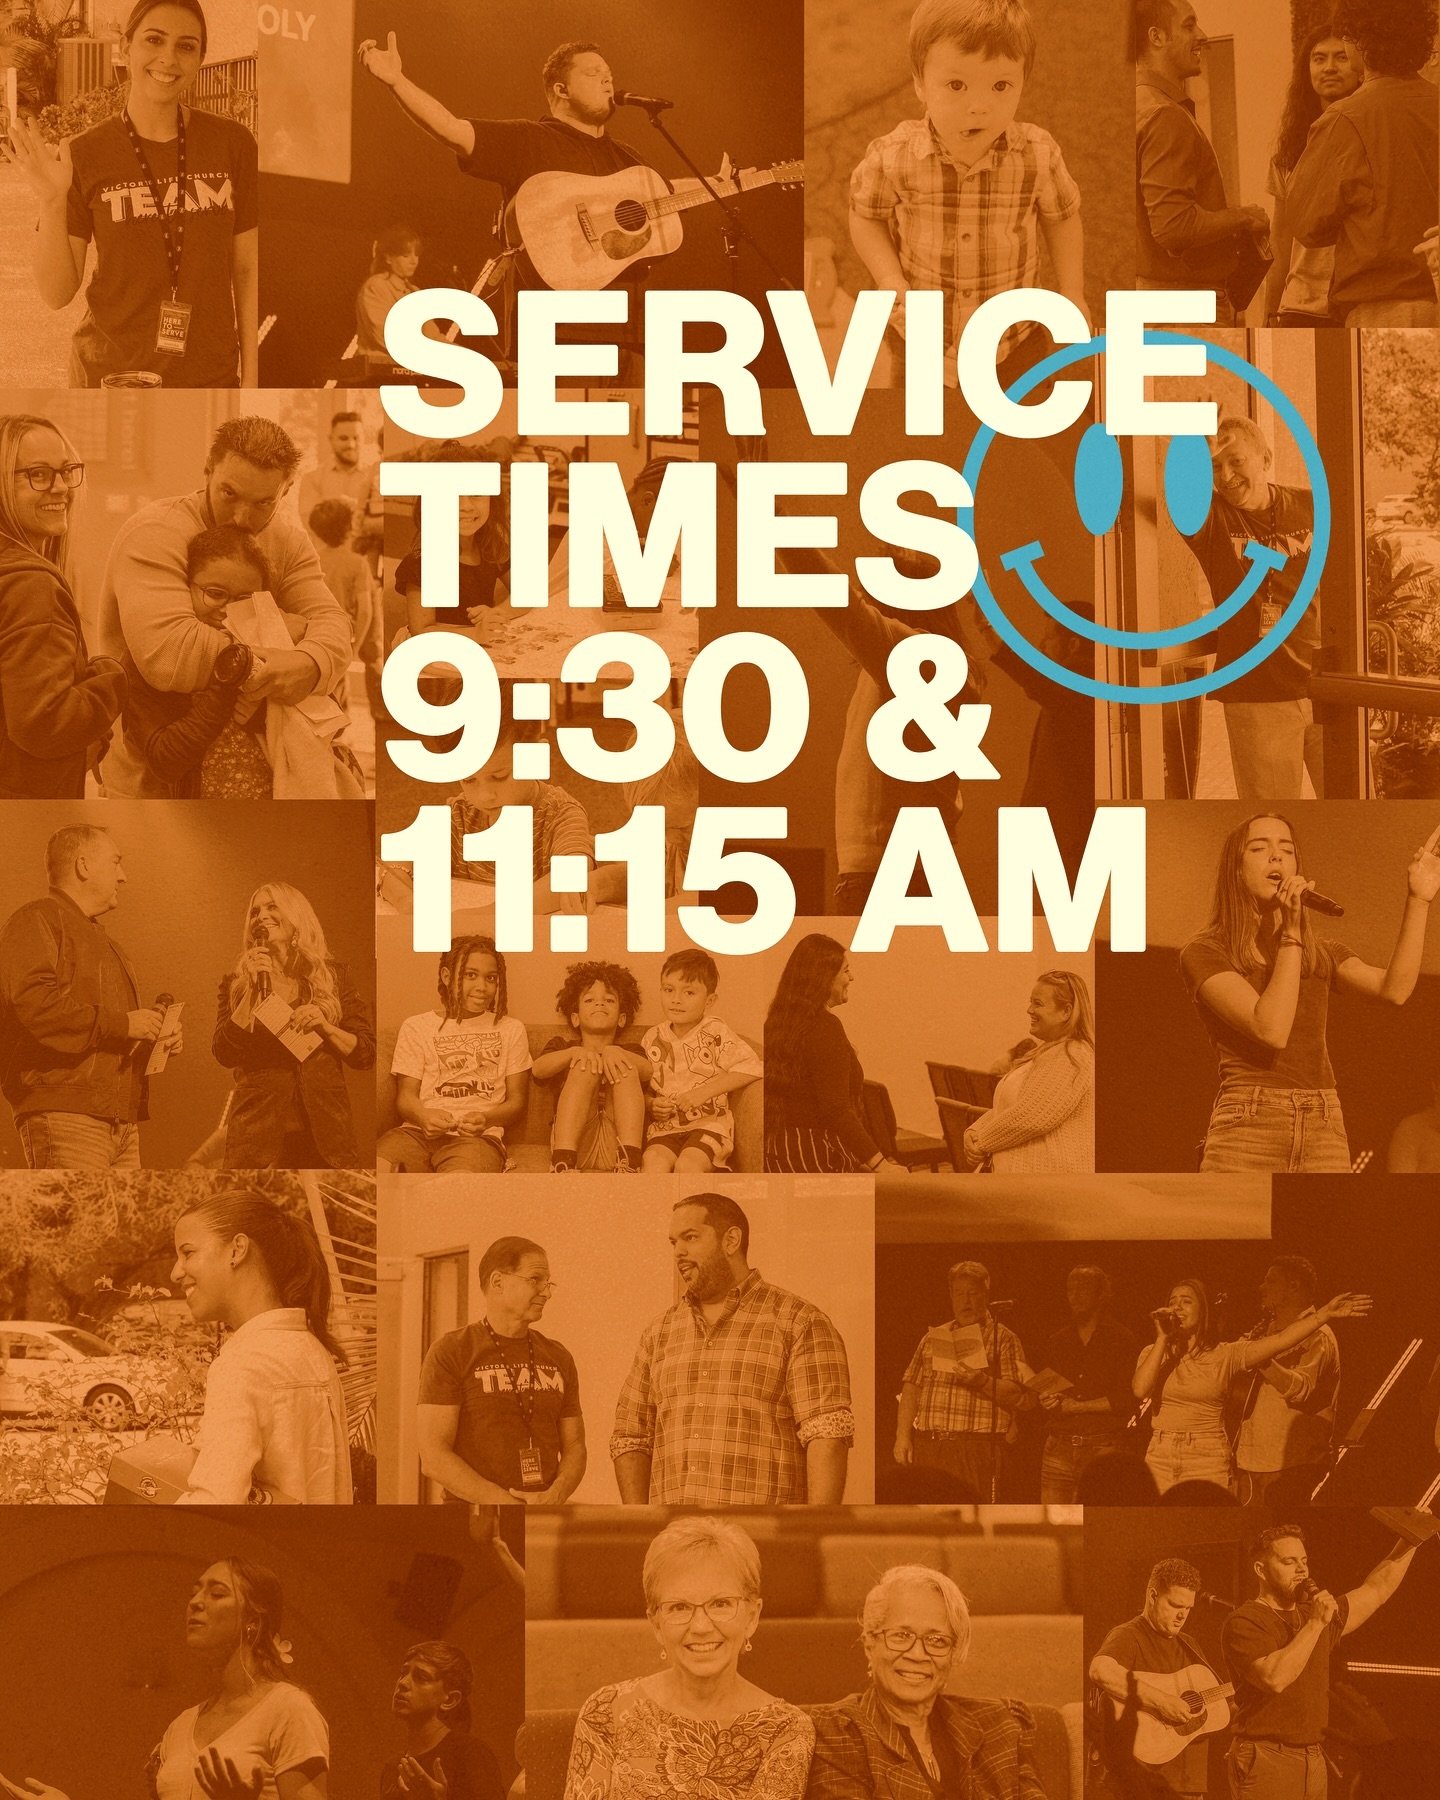 Counting down the hours until the launch of our new service times this weekend! 🚀 🎉 ✨

Leave us a comment with which service you&rsquo;re coming and who are you inviting this Sunday!

New services times 
⏰ 9:30 AM + 11:15 AM 
⛪️ Victory Life Church